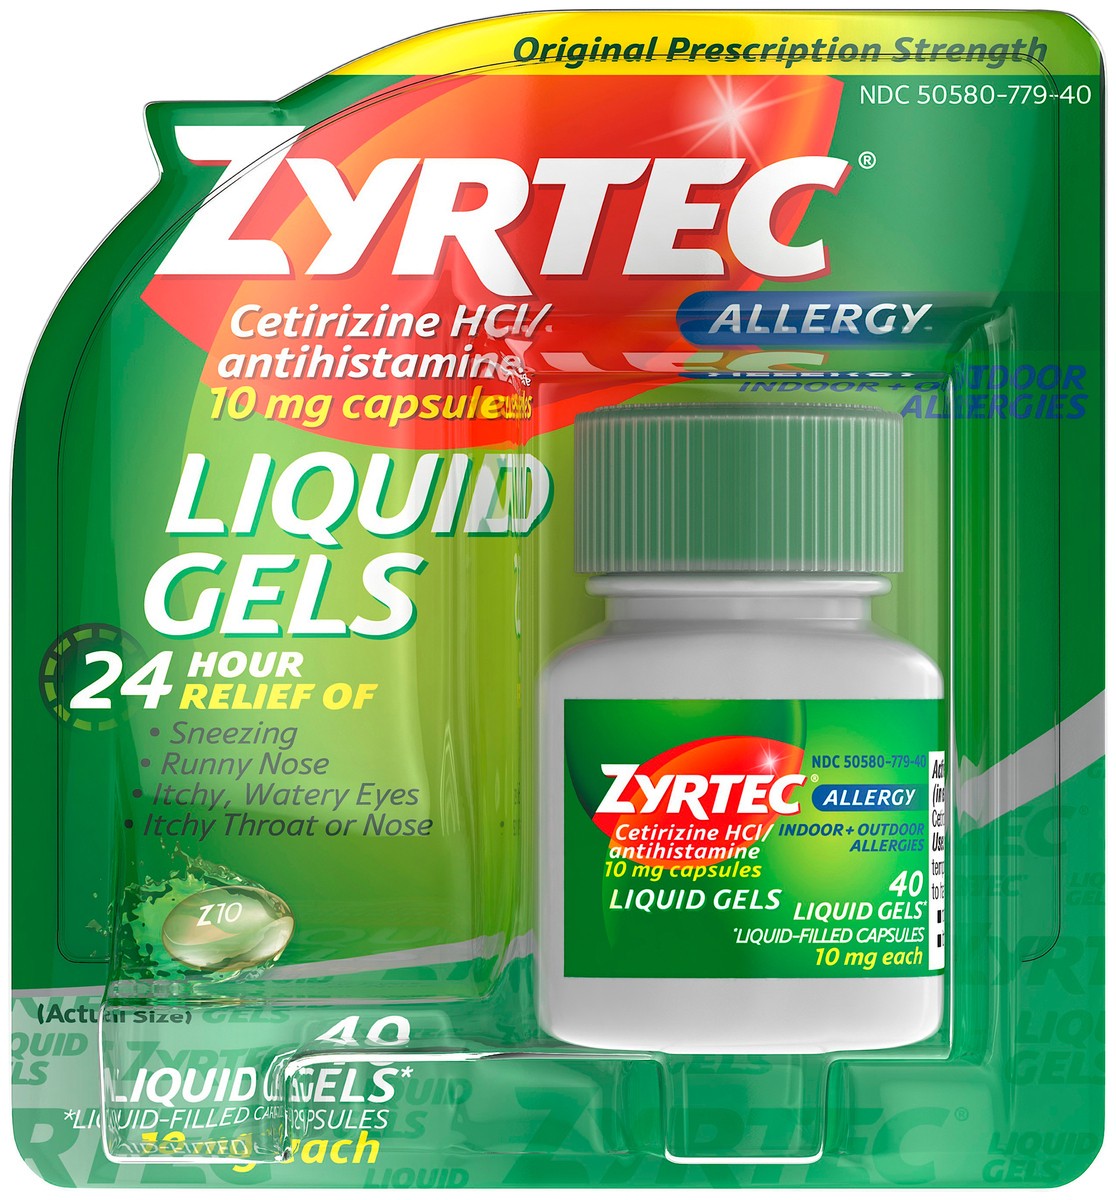 slide 5 of 7, Zyrtec 24 Hour Allergy Relief Liquid Gels, Antihistamine Capsules with Cetirizine Hydrochloride Allergy Medicine for All-Day Relief from Runny Nose, Sneezing, Itchy Eyes & More, 40 ct, 40 ct